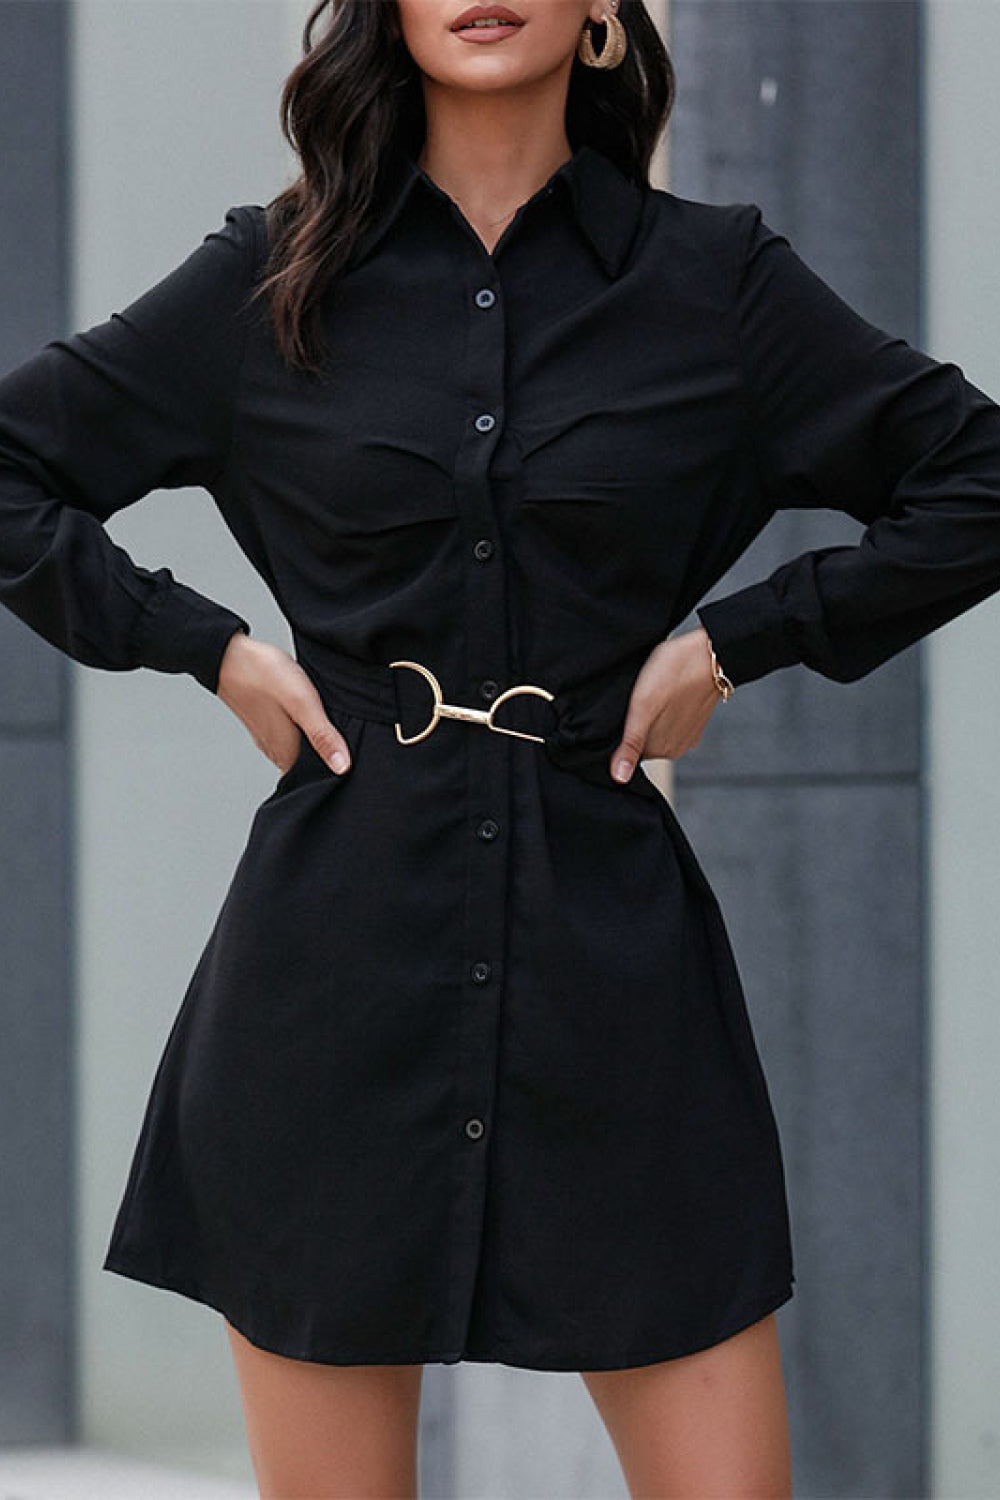 Home Office or a Night Out Chic Collared Shirt Dress with Belt - Gen U Us Products